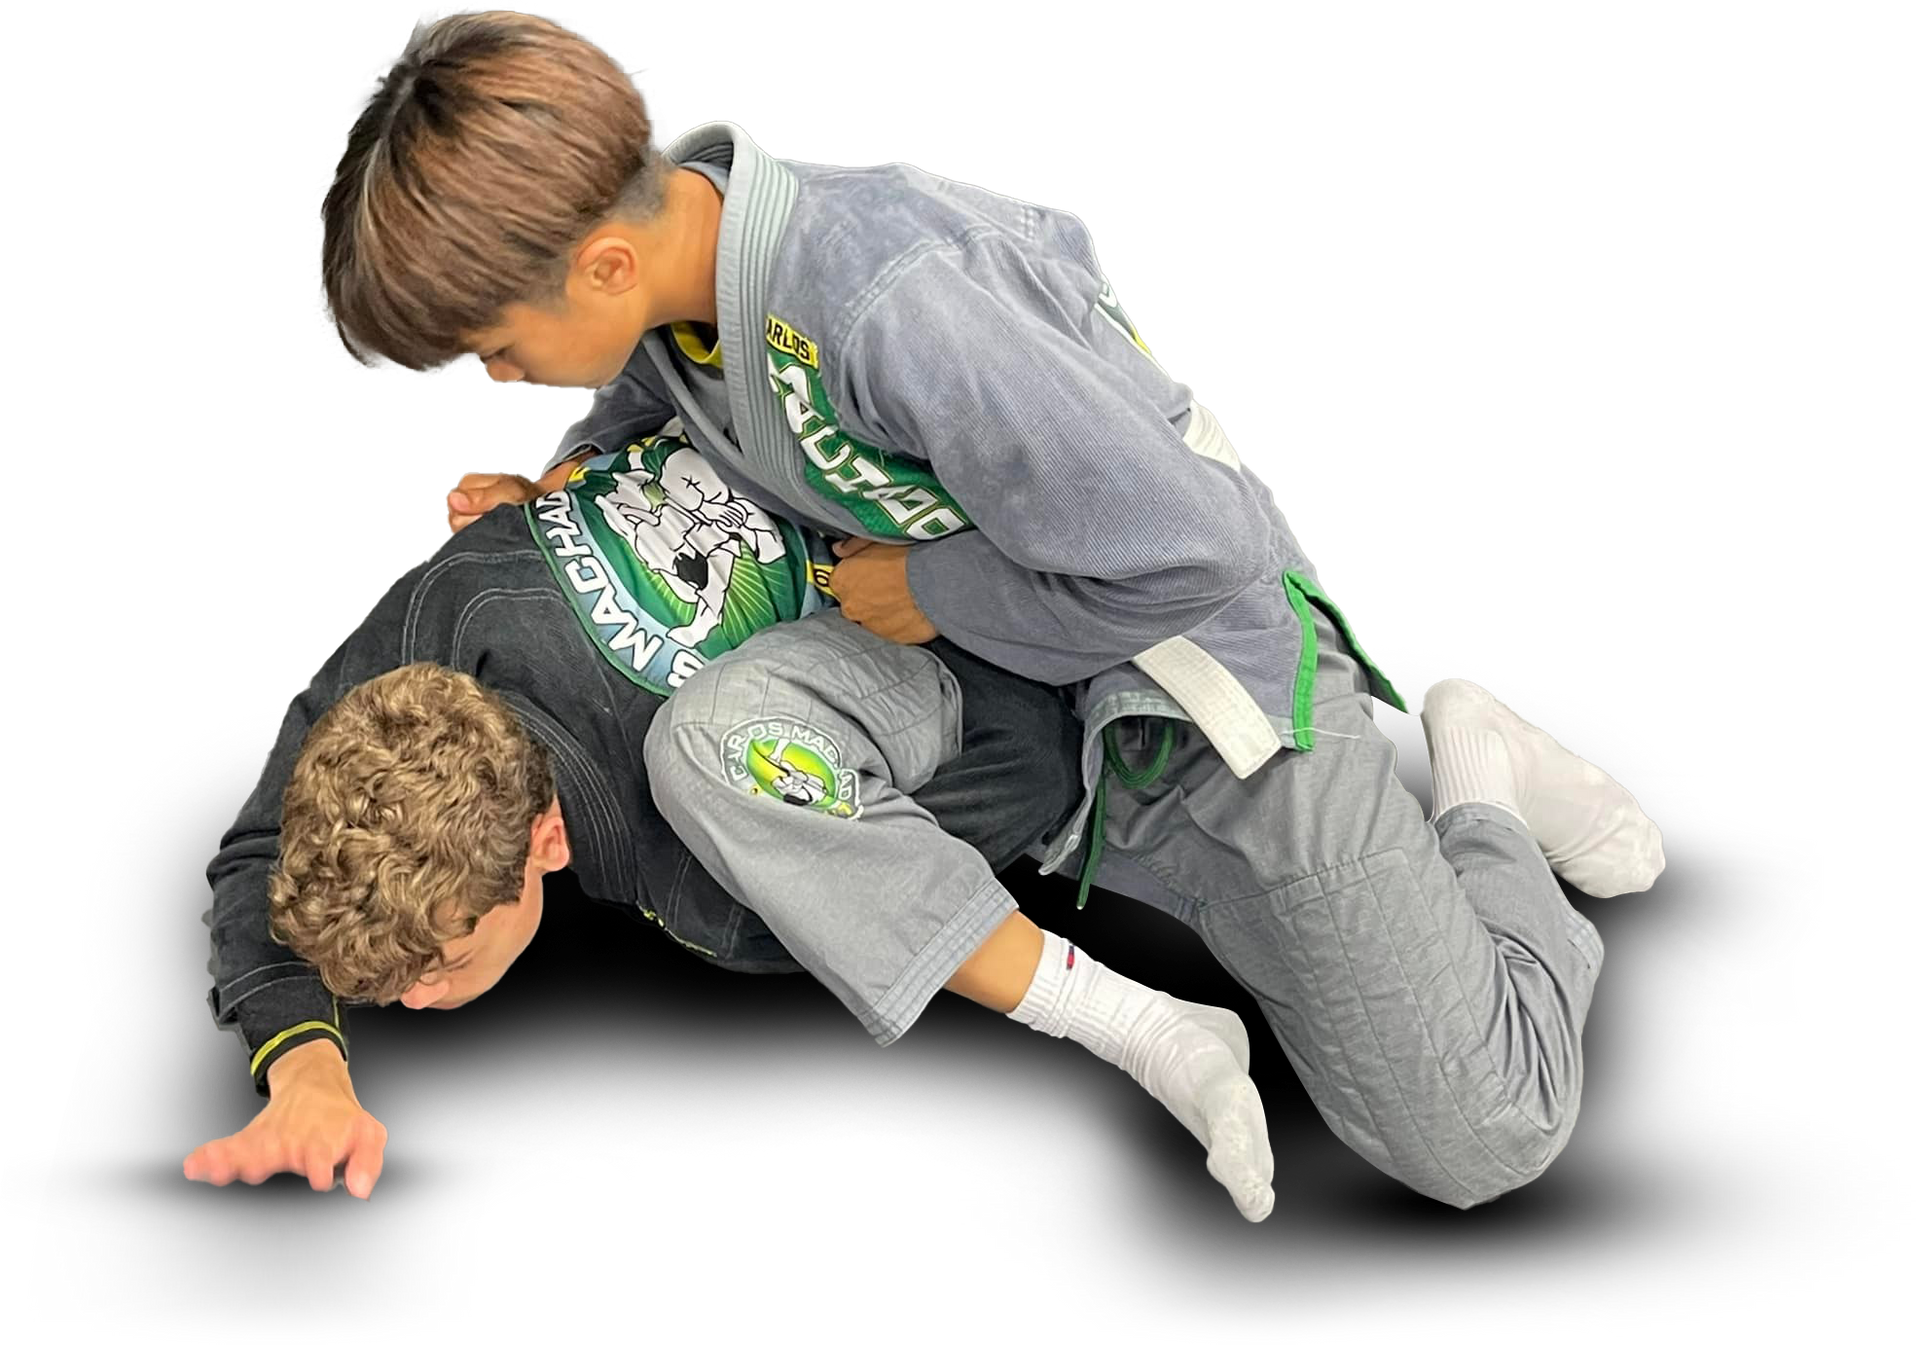 Two young boys are wrestling on the ground.